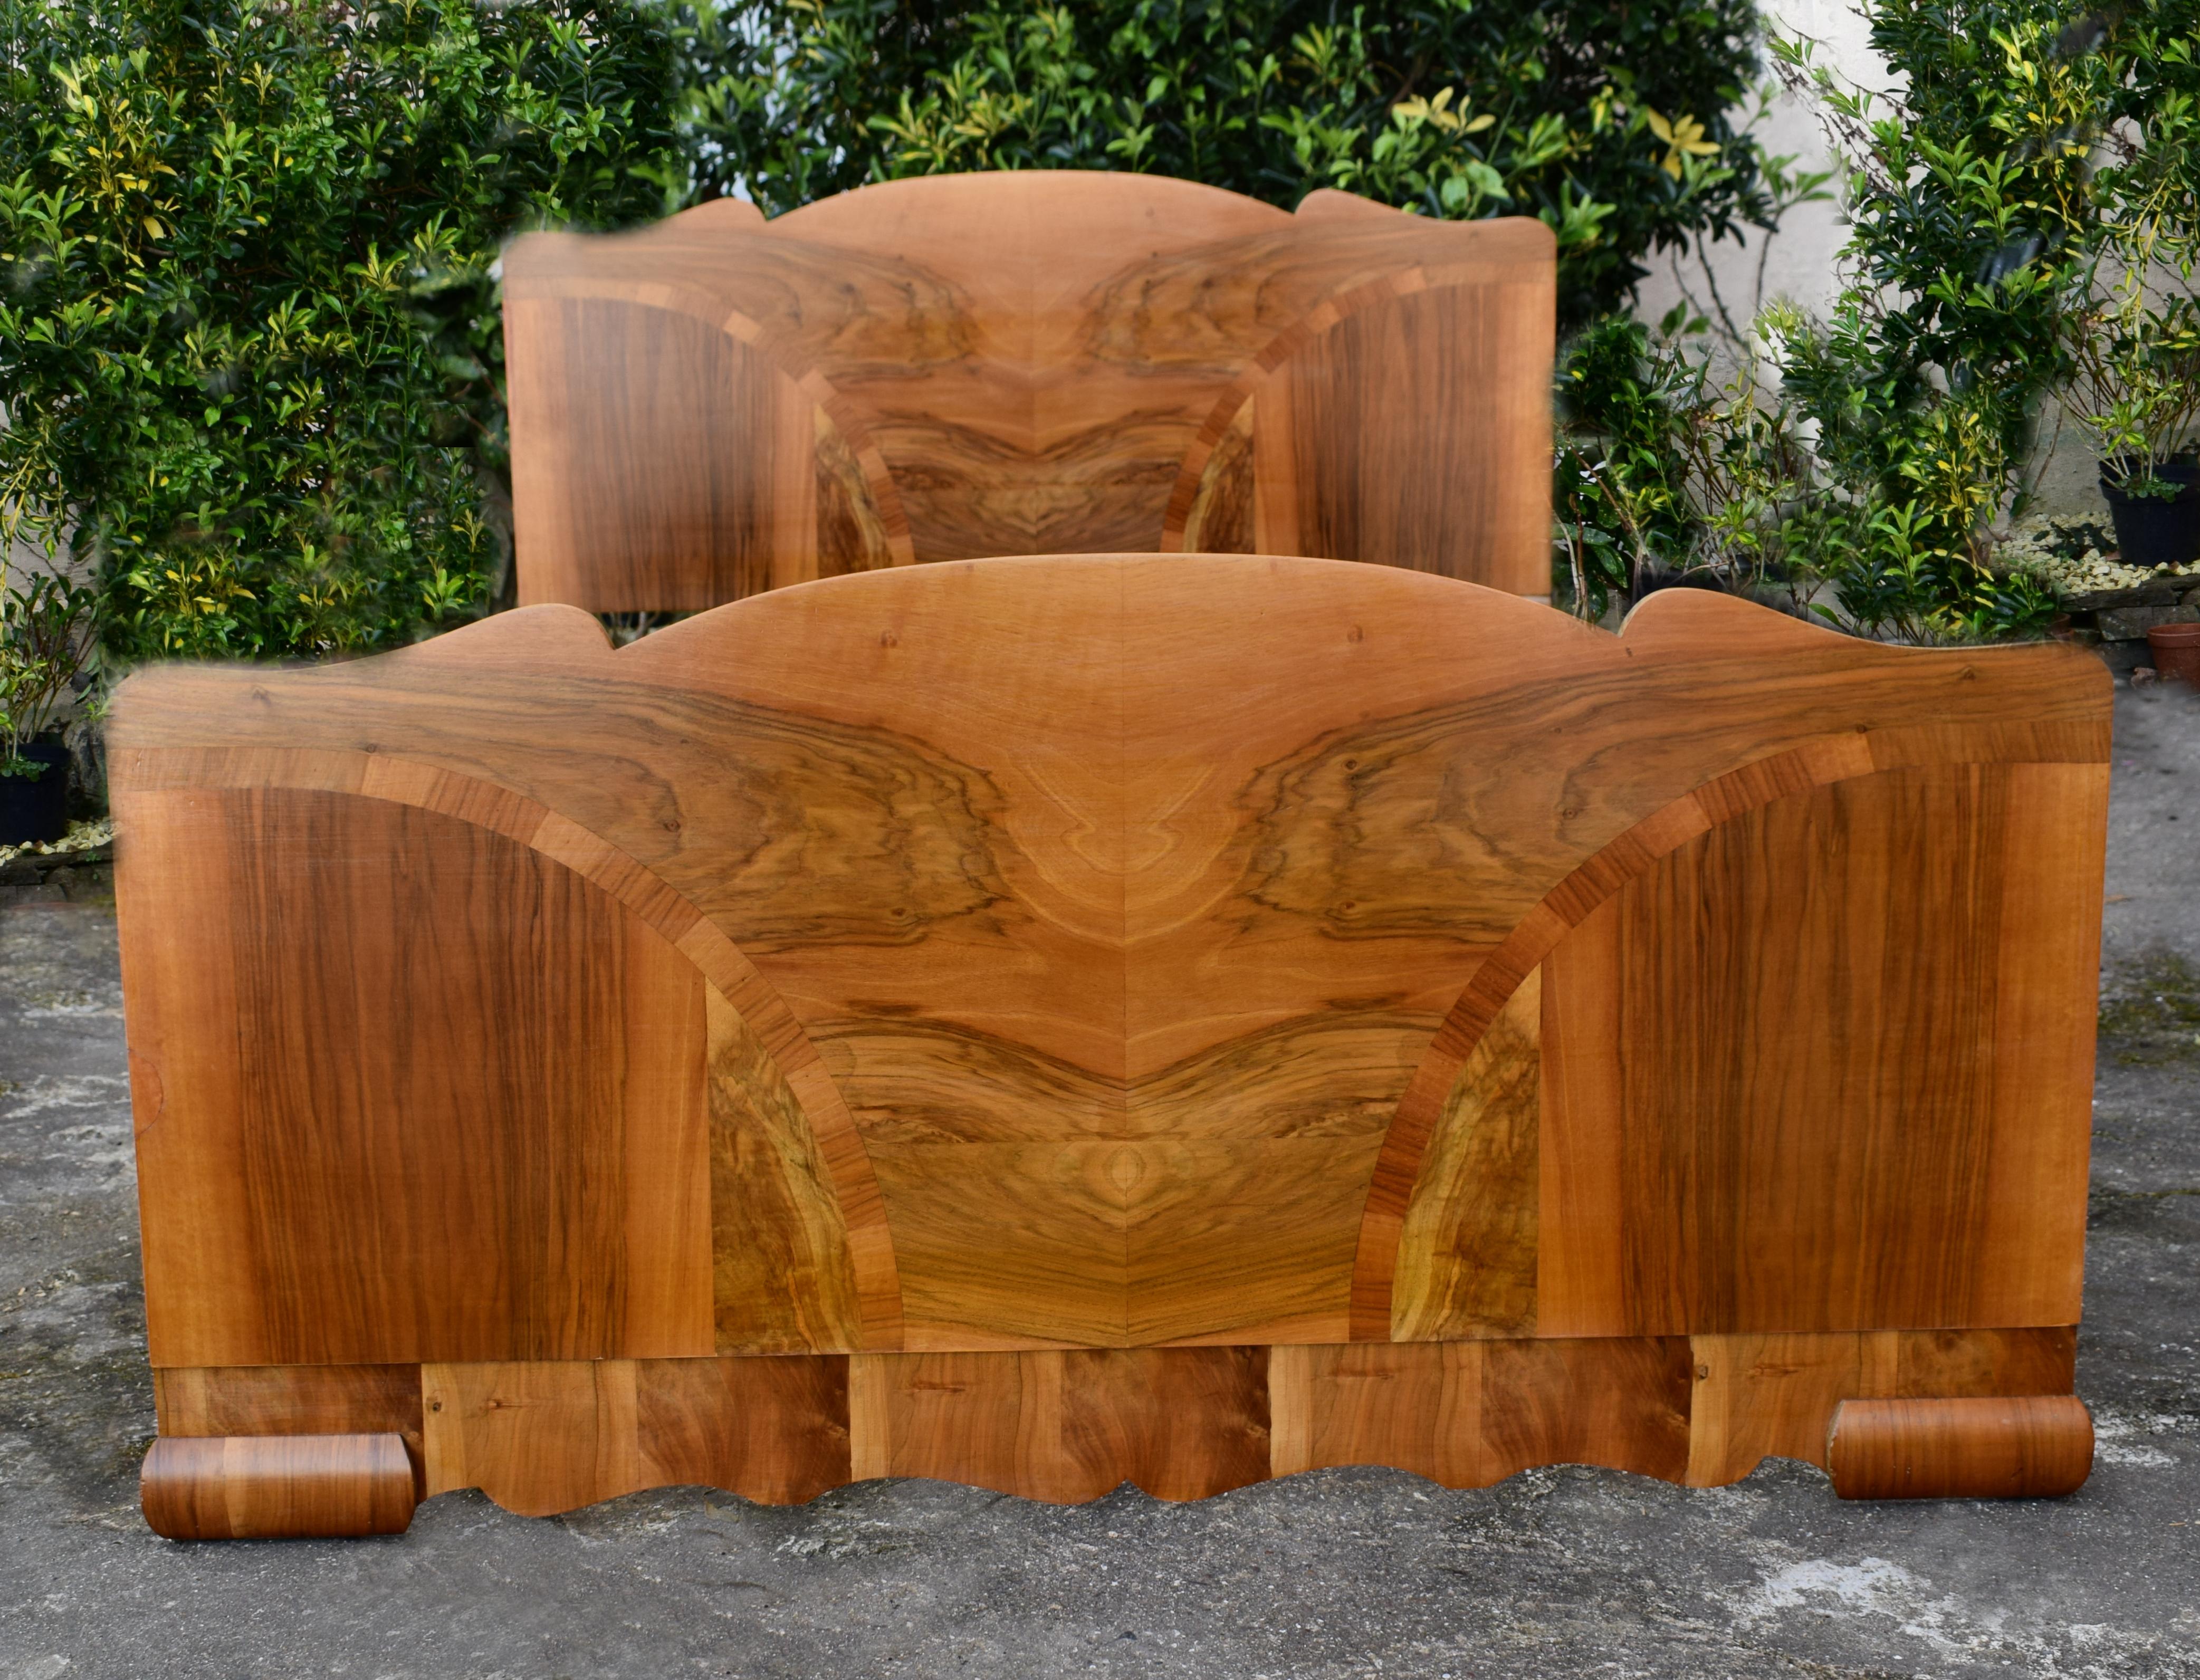 Fabulous 1930s Art Deco walnut bed originating from England. The veneers are so beautifully detailed, the quality oozes from this bed. Features headboard, foot board and two side irons. The walnut veneers and the book paging is of stunning quality,